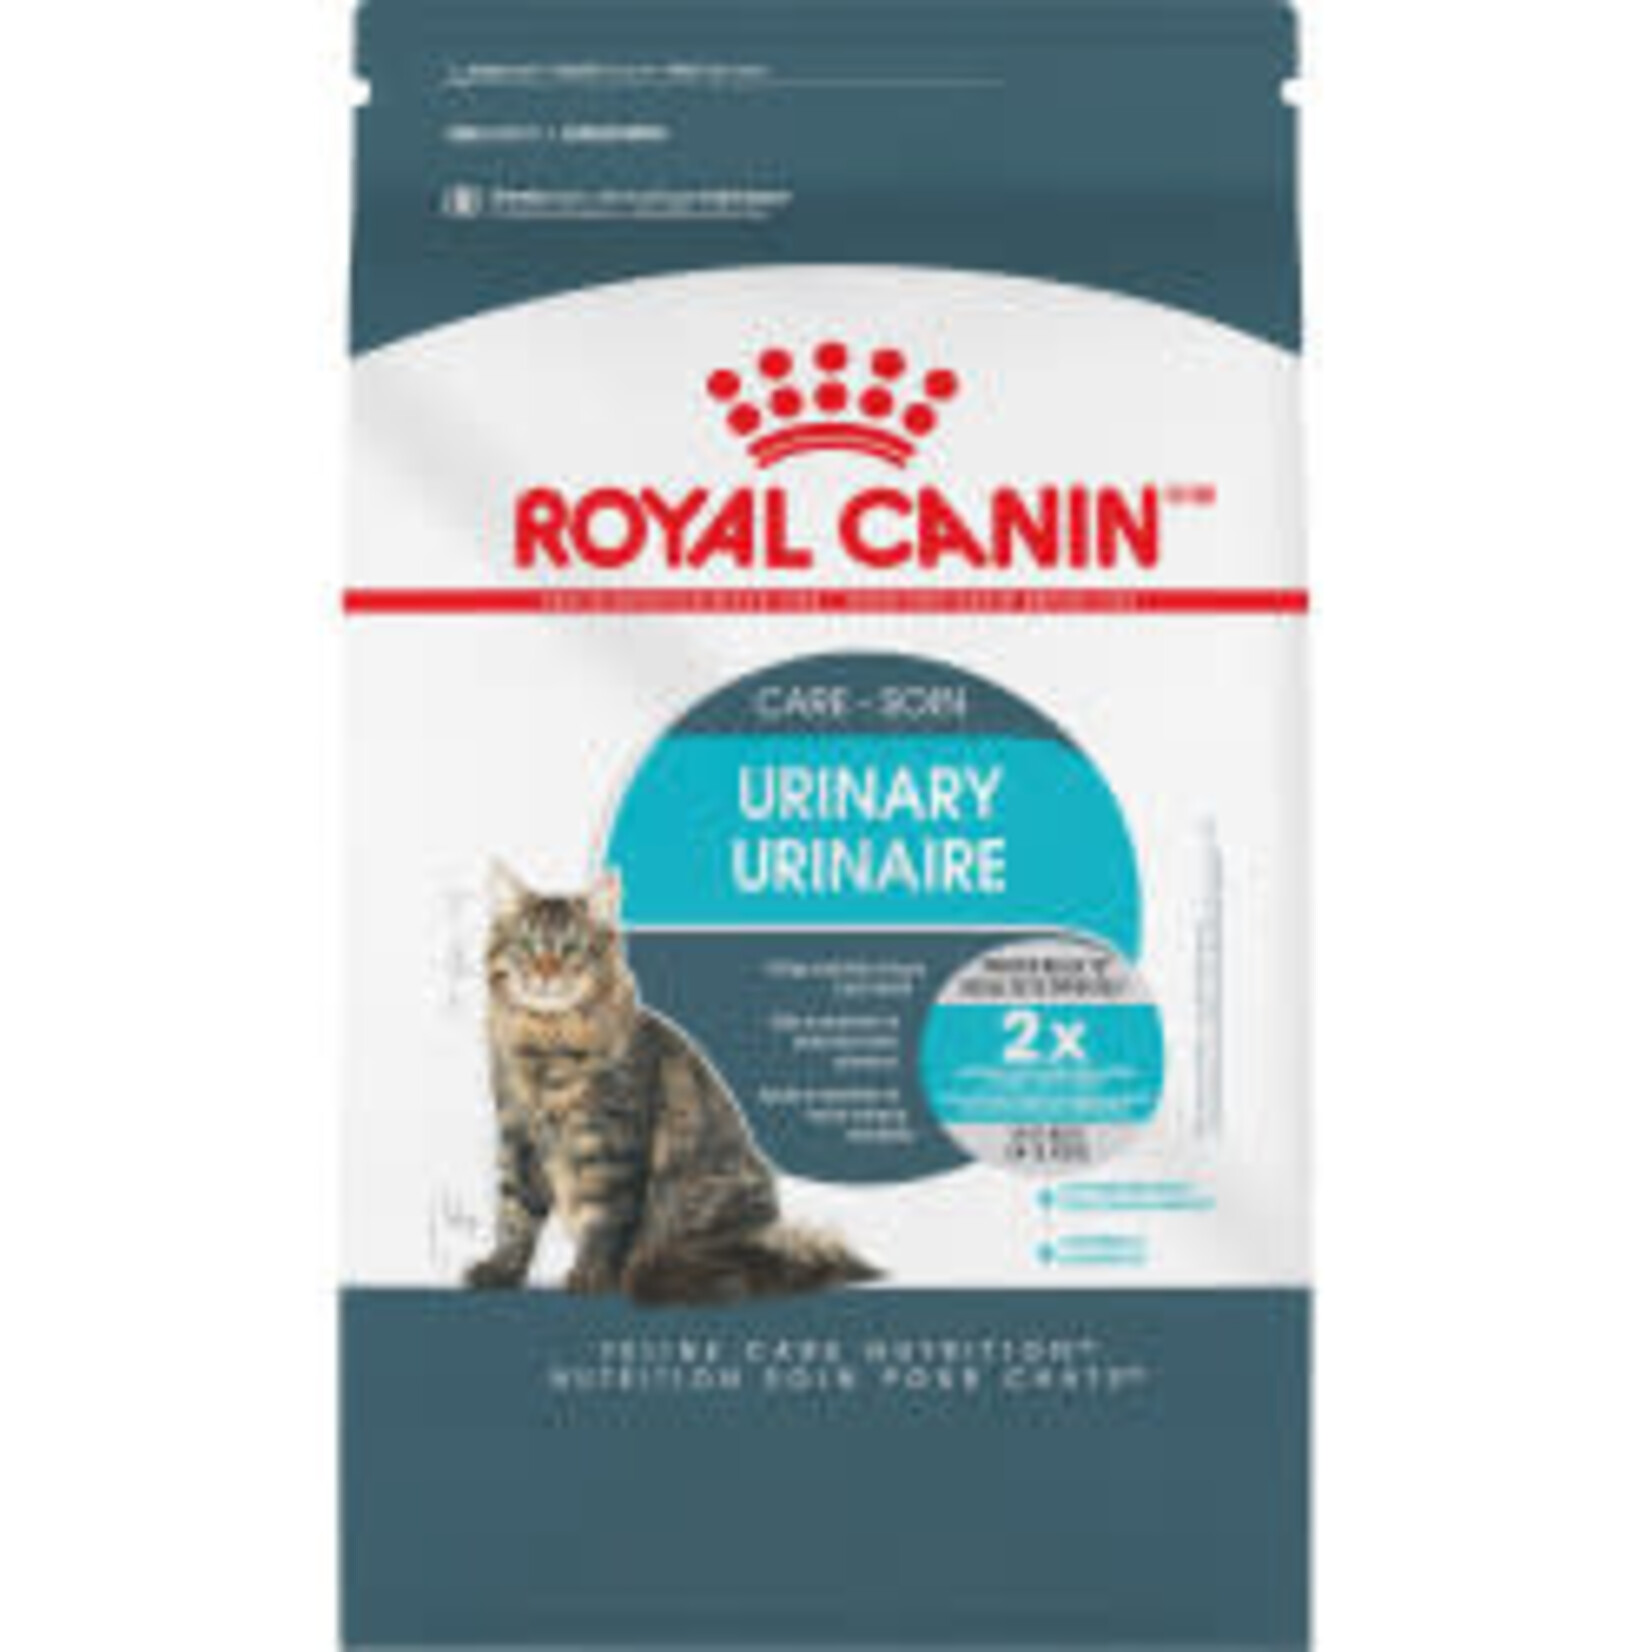 Royal Canin Royal Canin chat soin urinaire 3lb